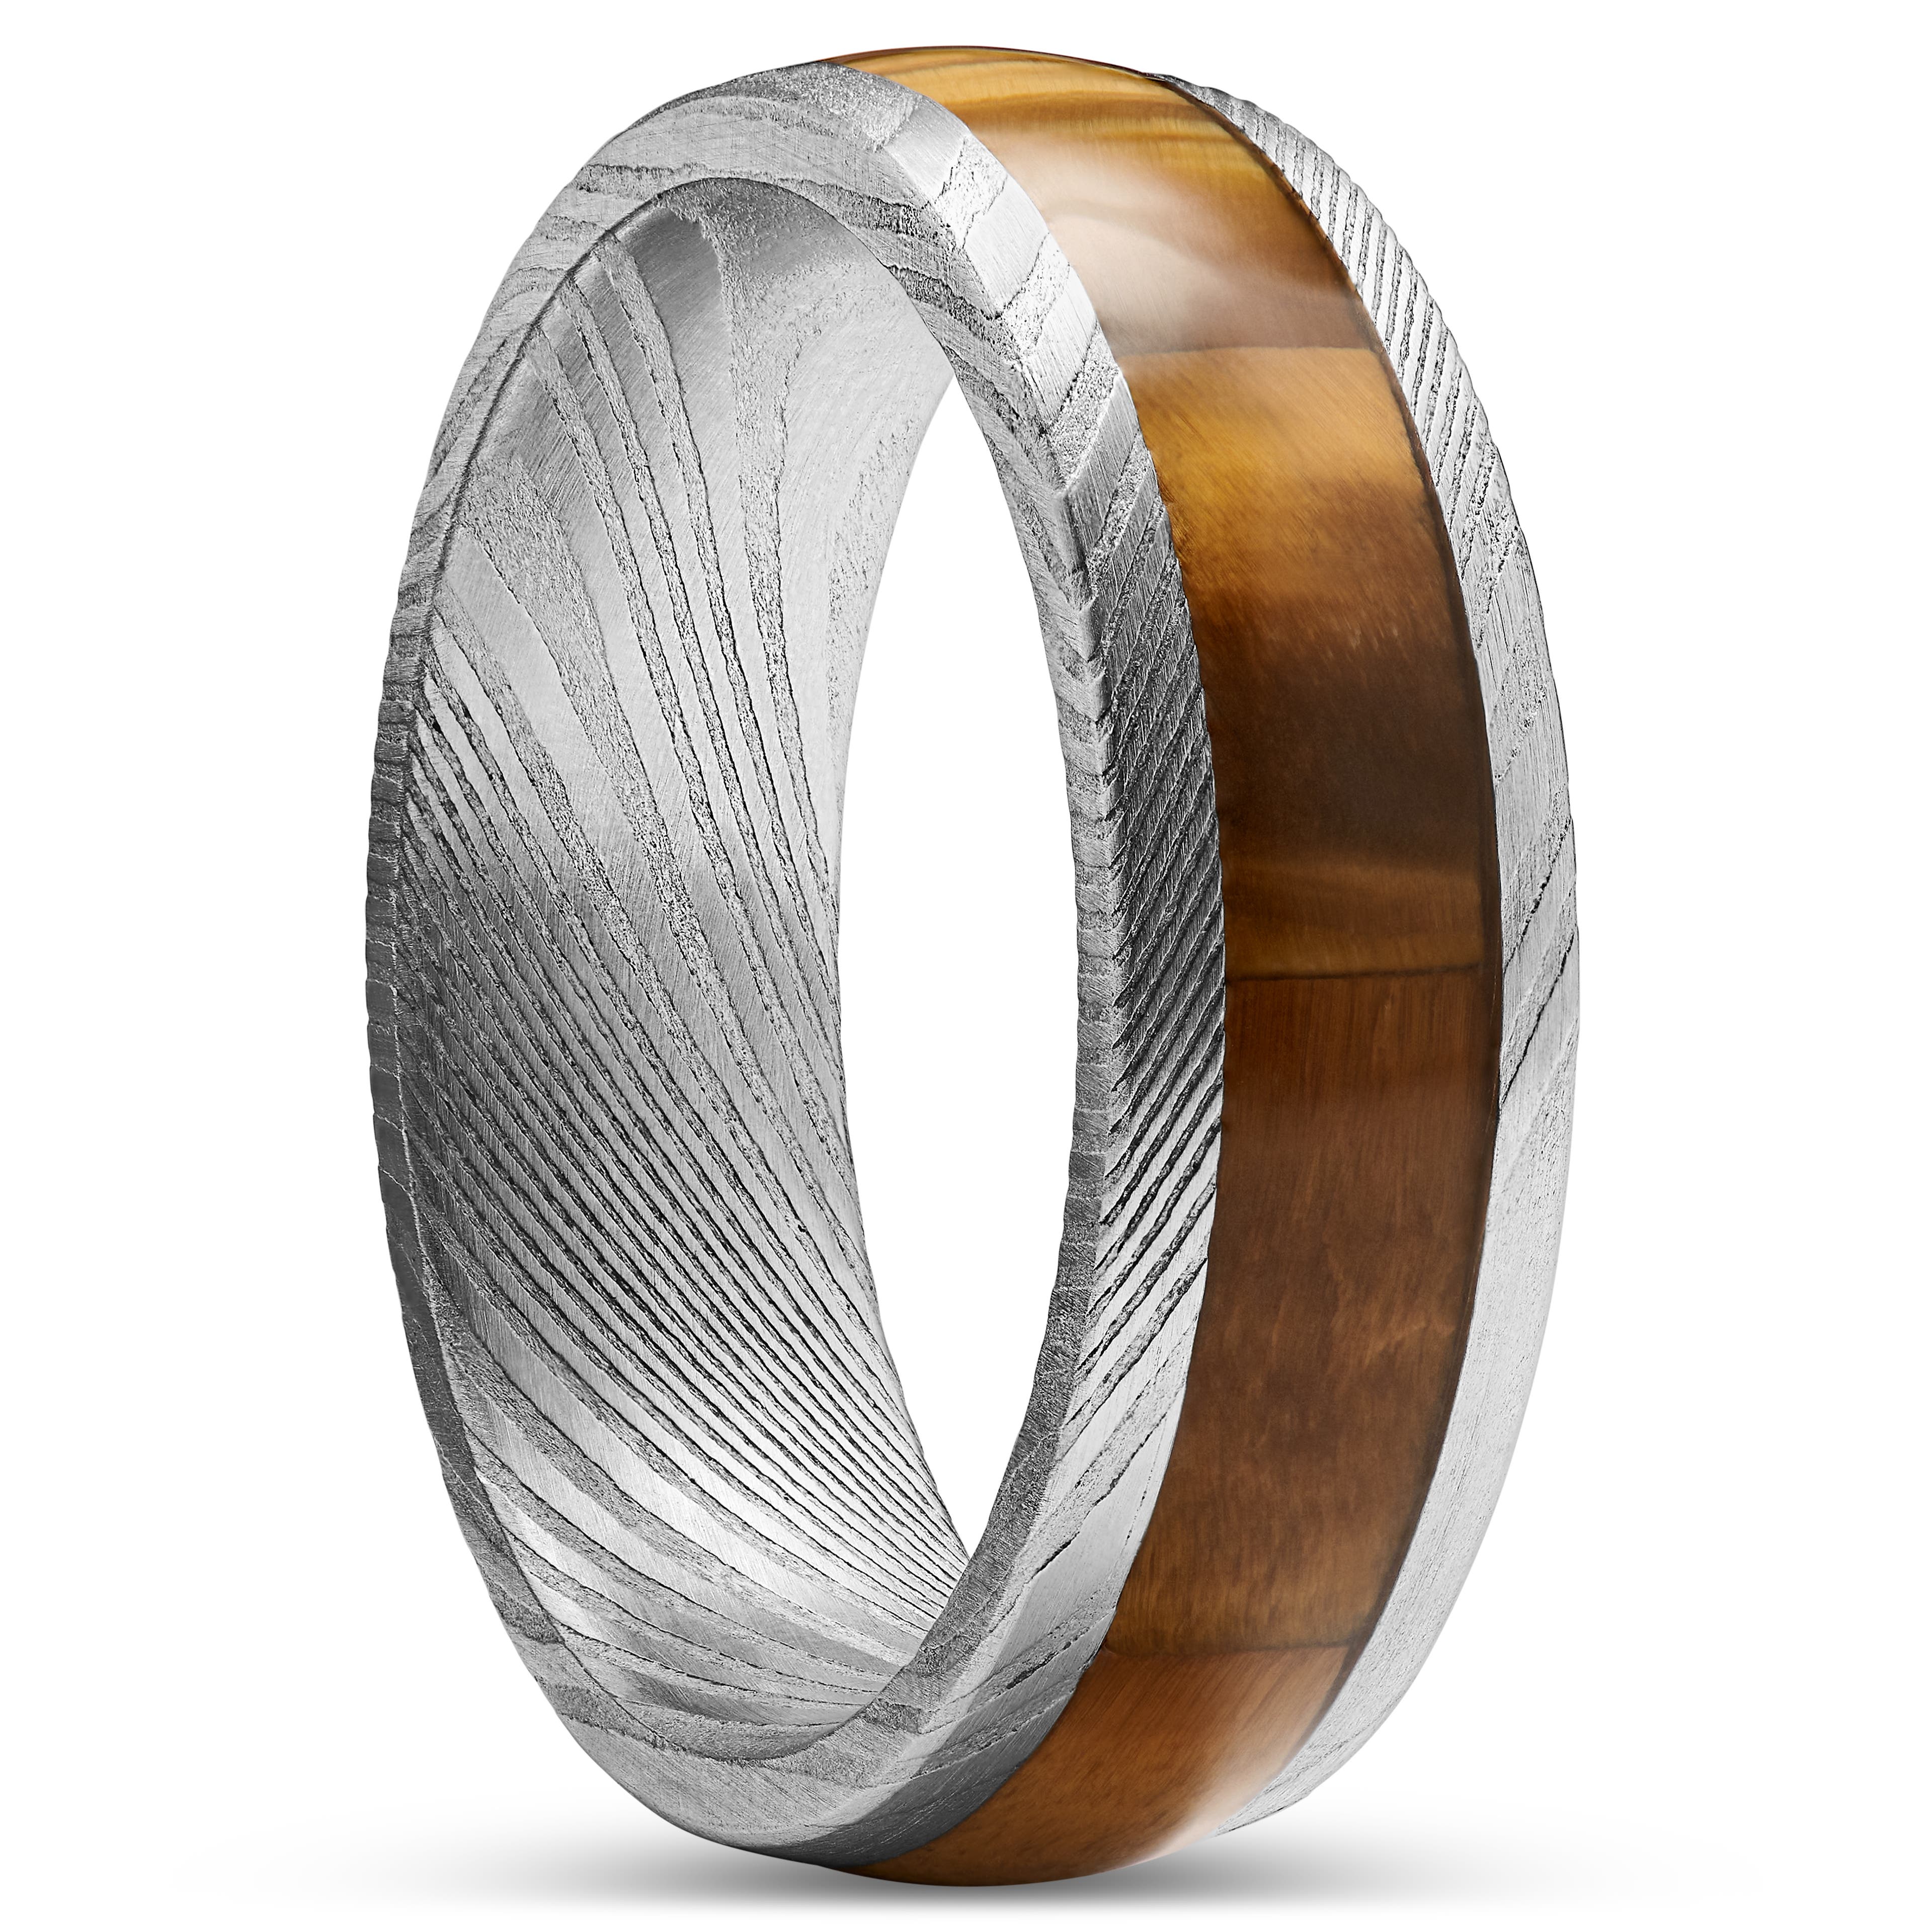 Fortis | 7 mm Silver-Tone Damascus Steel Ring with Tiger’s Eye Inlay